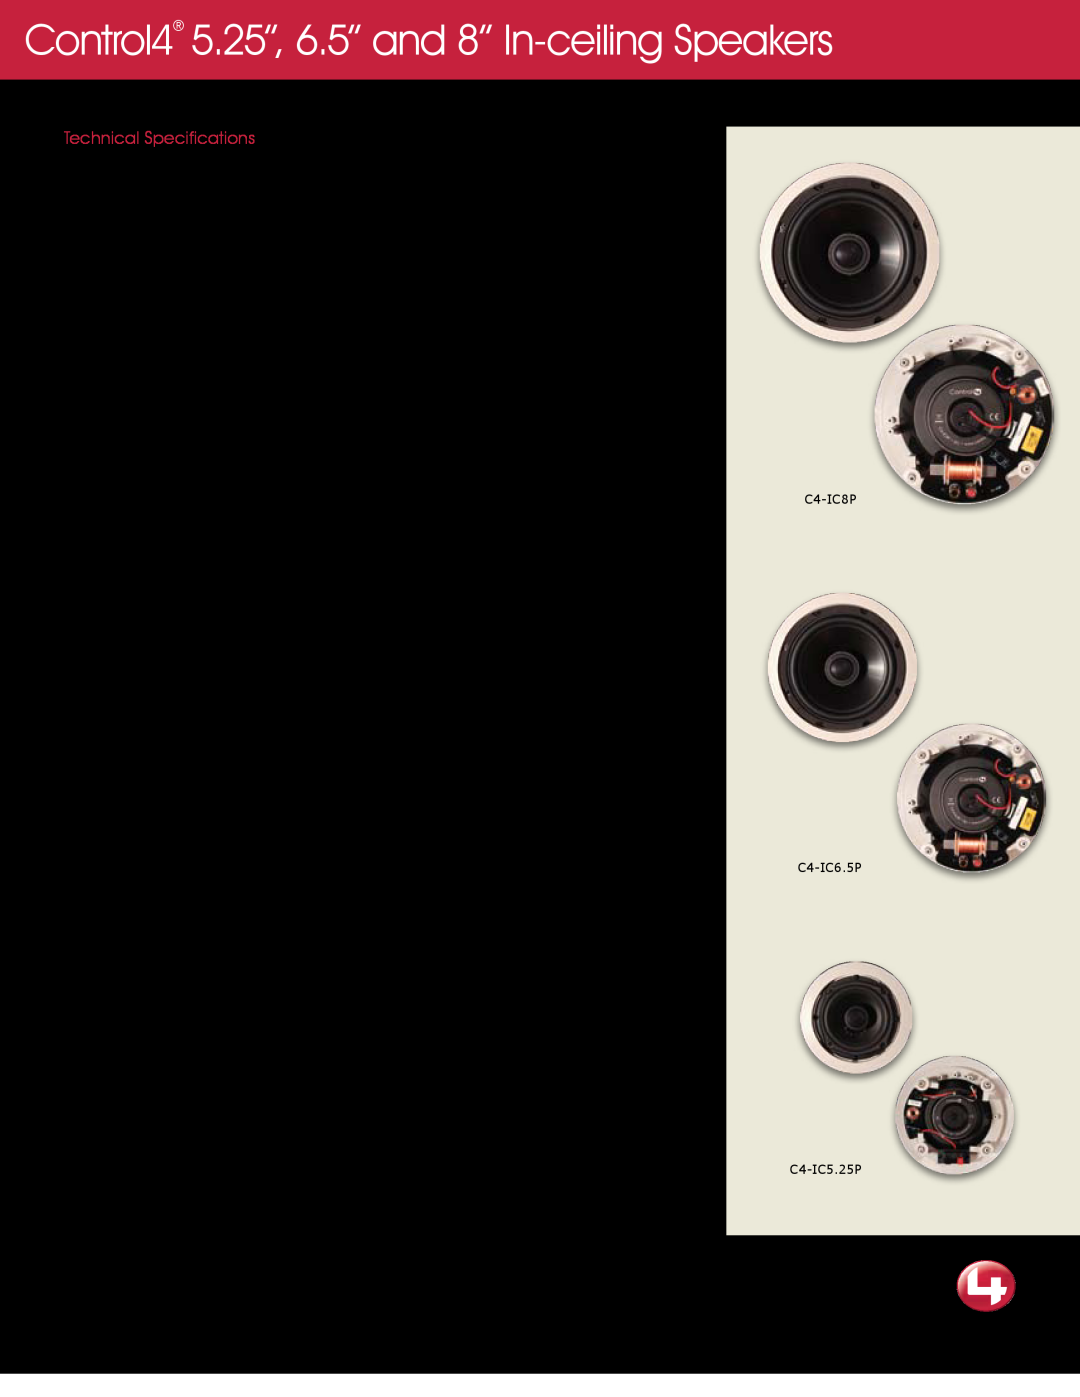 Control4 C4-IC8P manual Control4 5.25”, 6.5” and 8” In-ceilingSpeakers, Technical Specifications, Model Numbers, C4-IC5.25P 